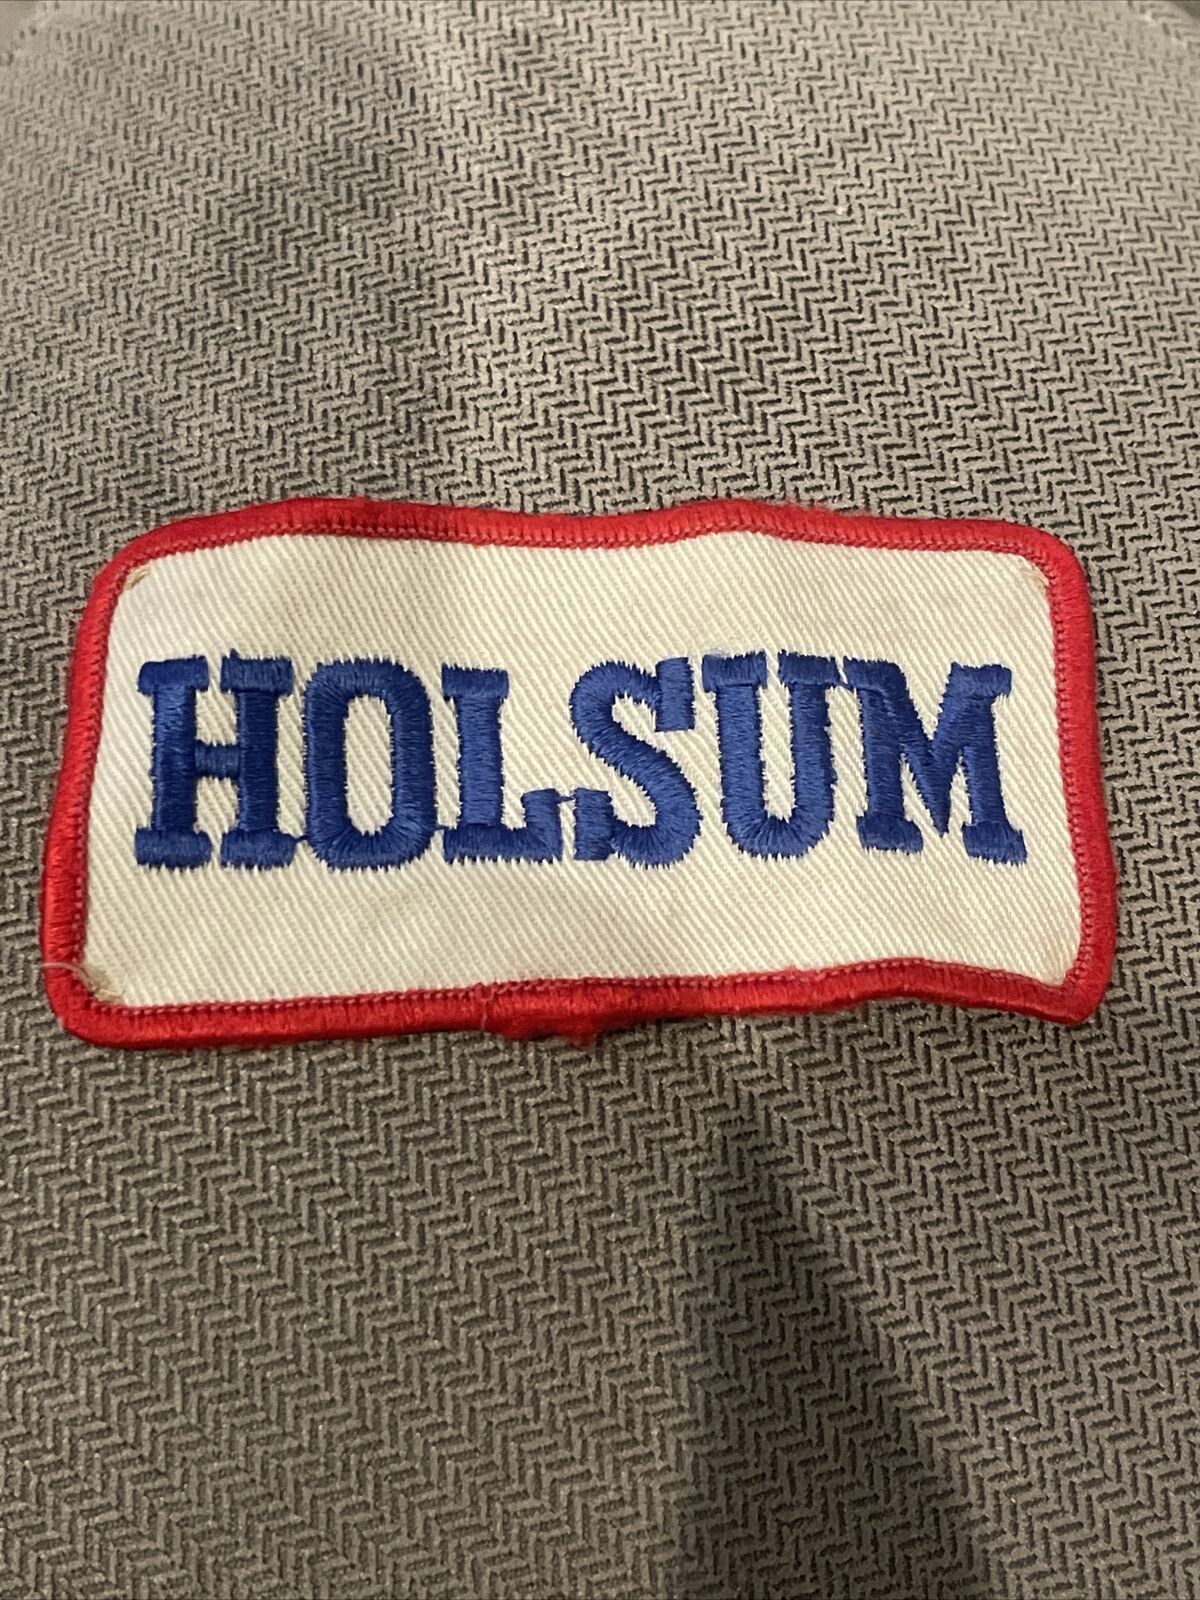 Holsum Vintage Embroidered Patch  3 1/2